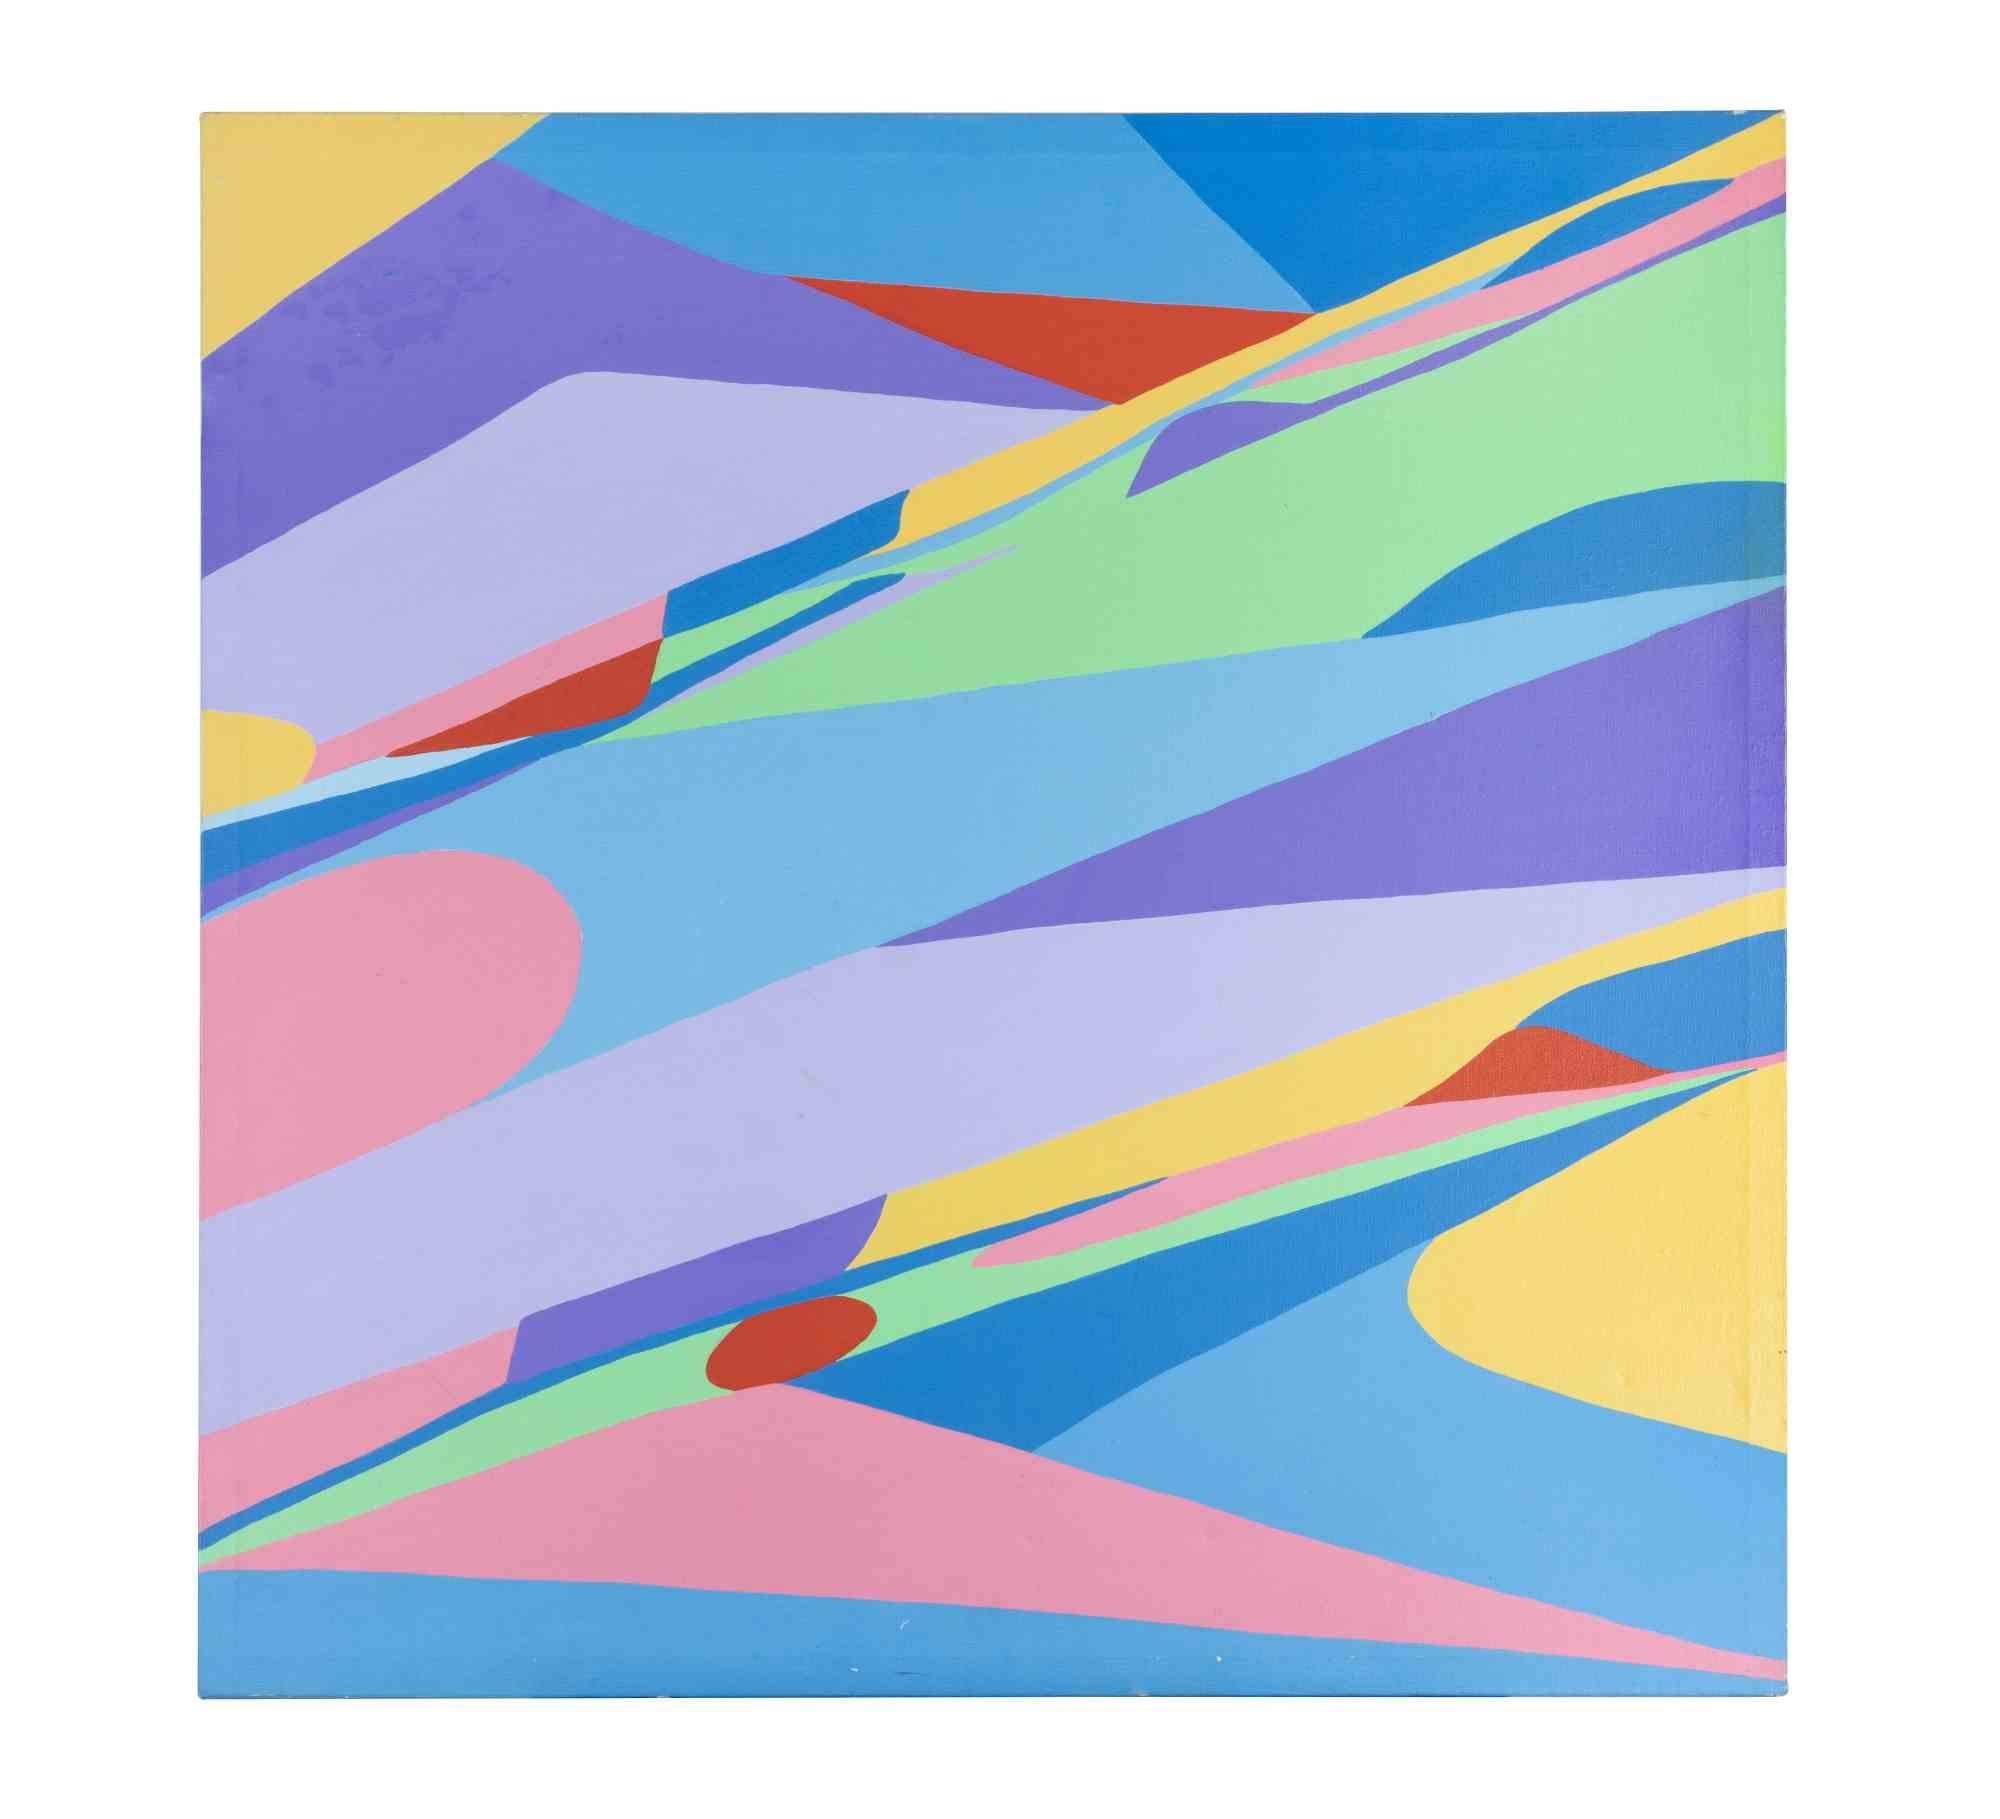 Polychrome surface 7610 is a contemporary artwork realized by Genny Puccini in 1976.

Mixed colored acrylic painting on canvas.

Hand signed and dated on the back.

